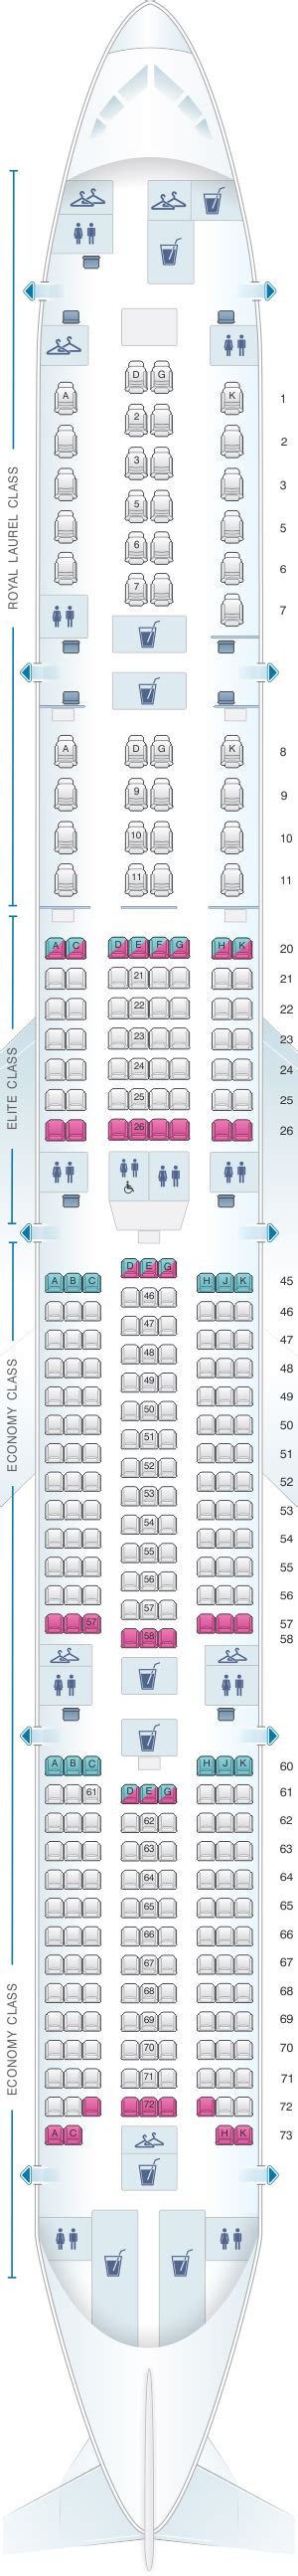 Boeing 787-10 (781) Seat Map. Info. Photos. Click any seat for more information. Key. For your next EVA Air flight, use this seating chart to get the most comfortable seats, legroom, and recline on . . 